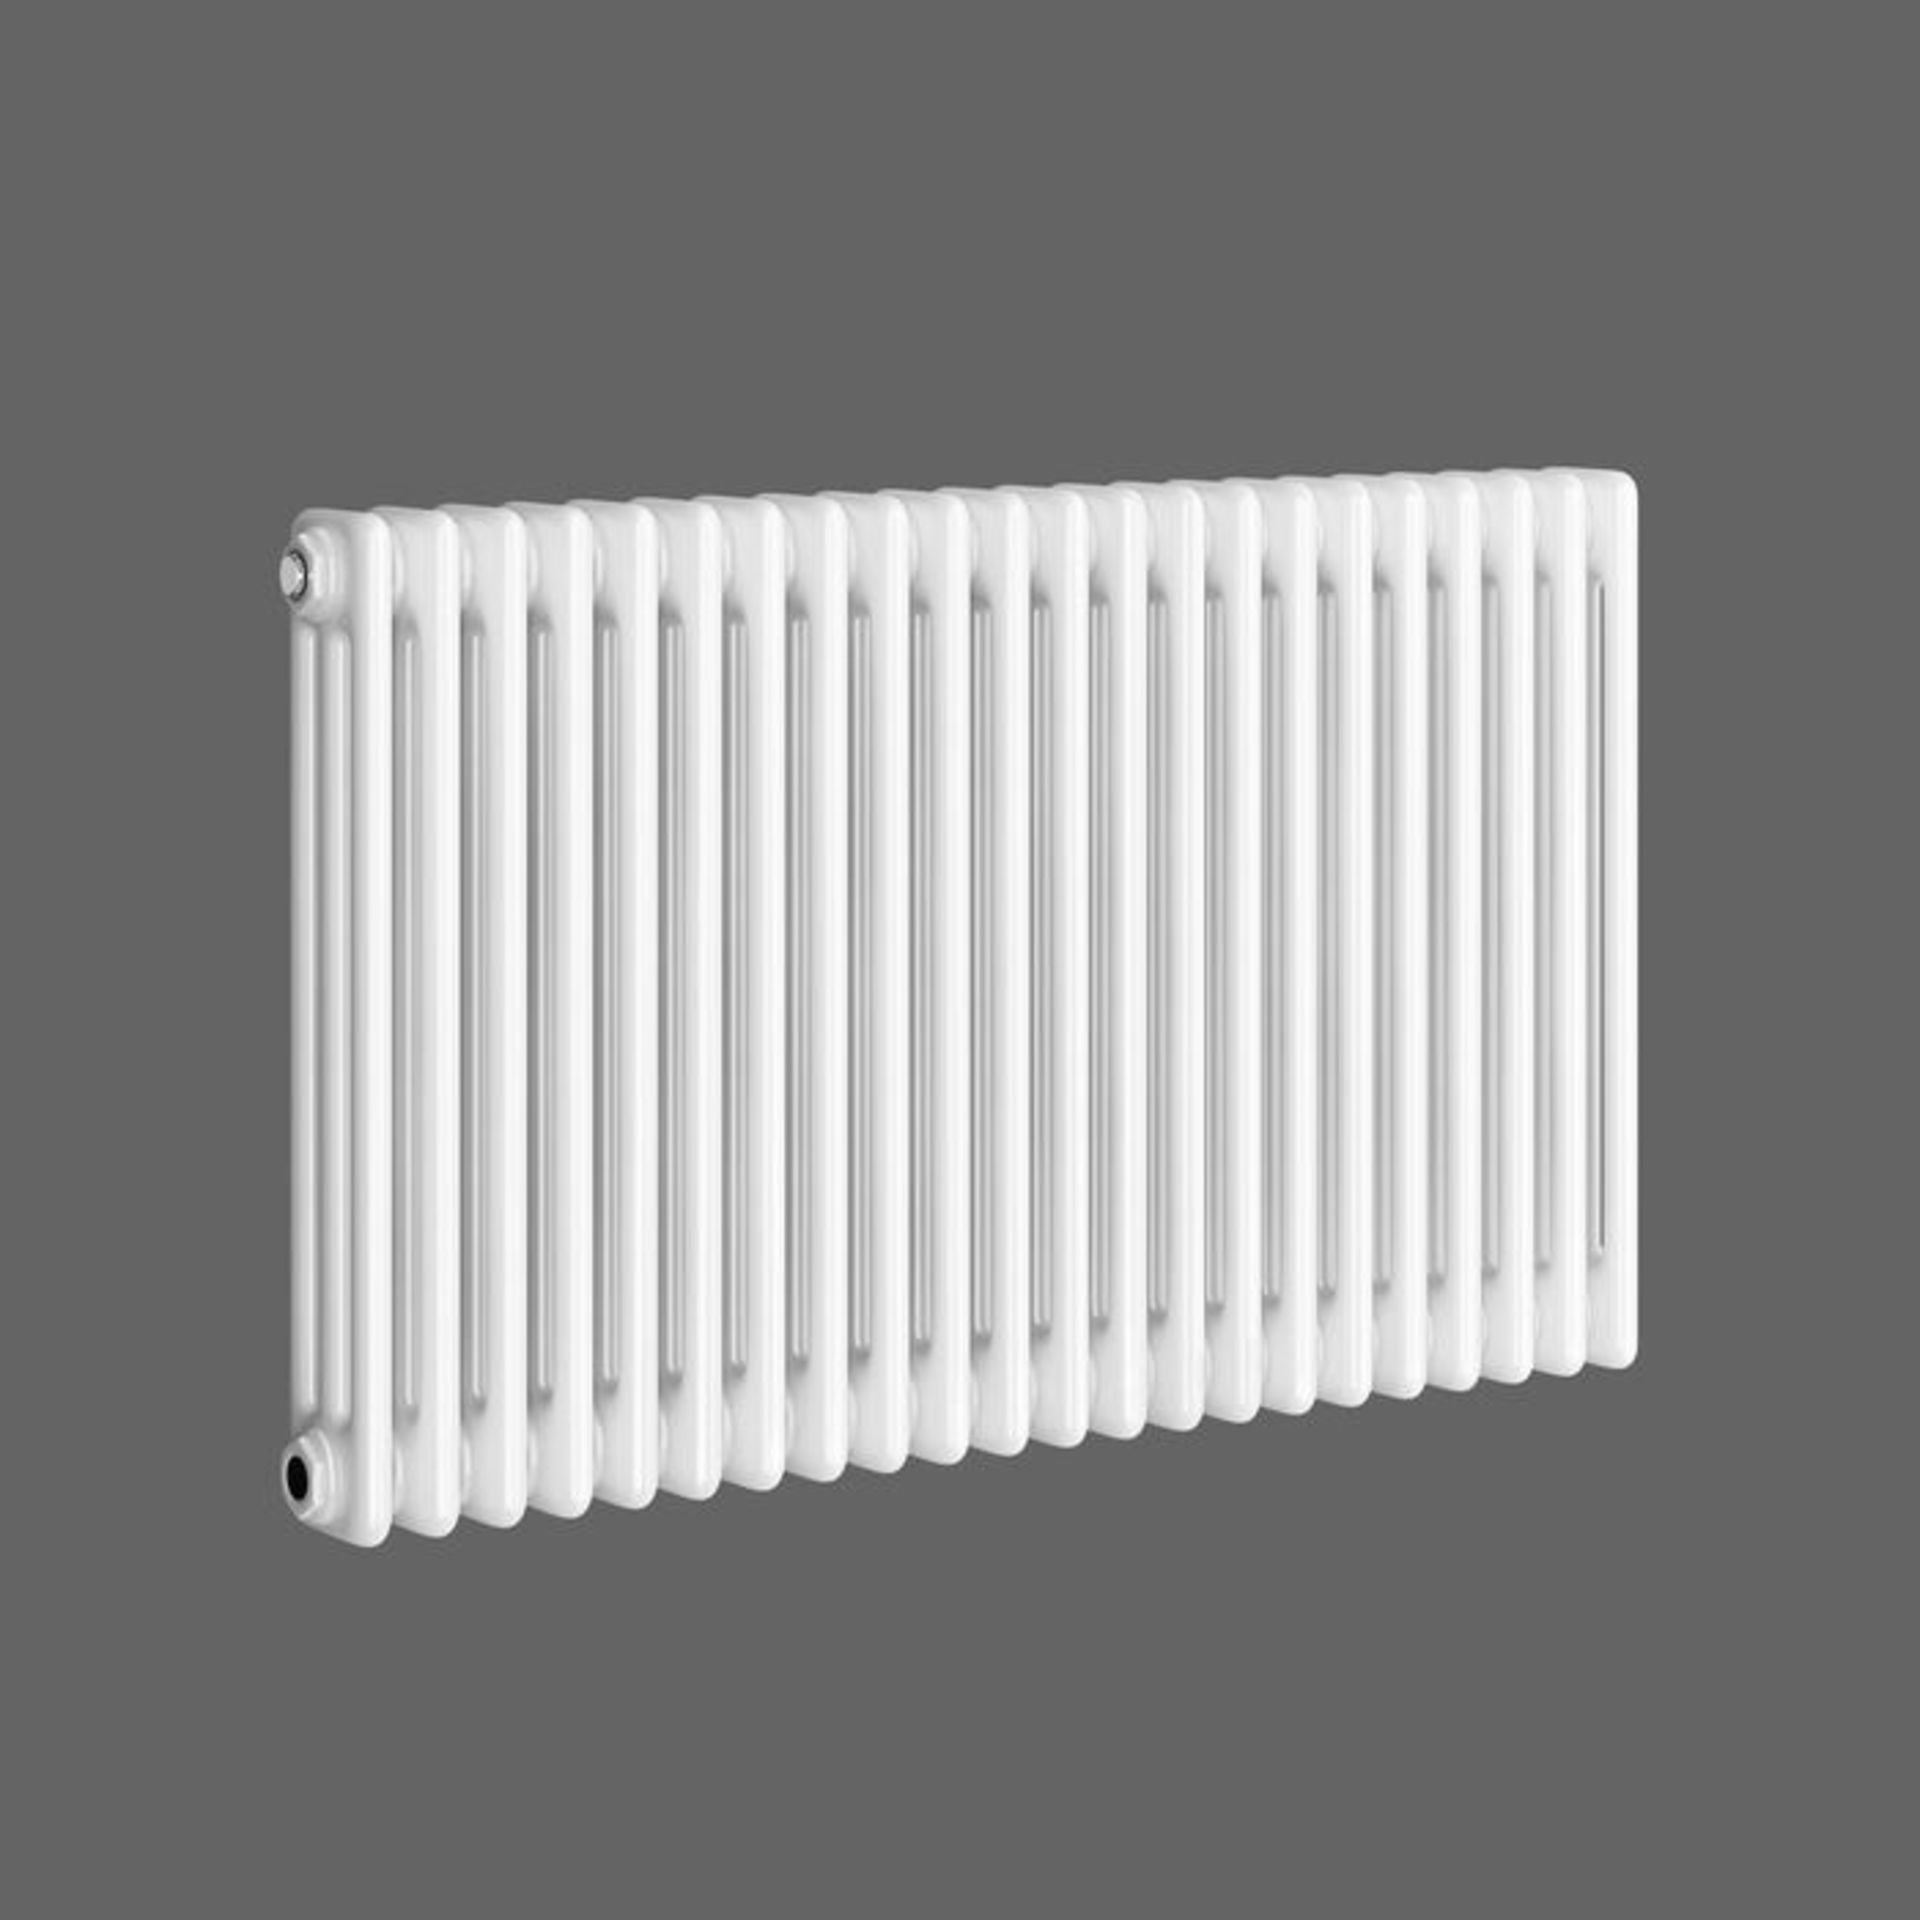 (L79) 600x1000mm White Triple Panel Horizontal Colosseum Traditional Radiator. RRP £483.99. Low - Image 3 of 3